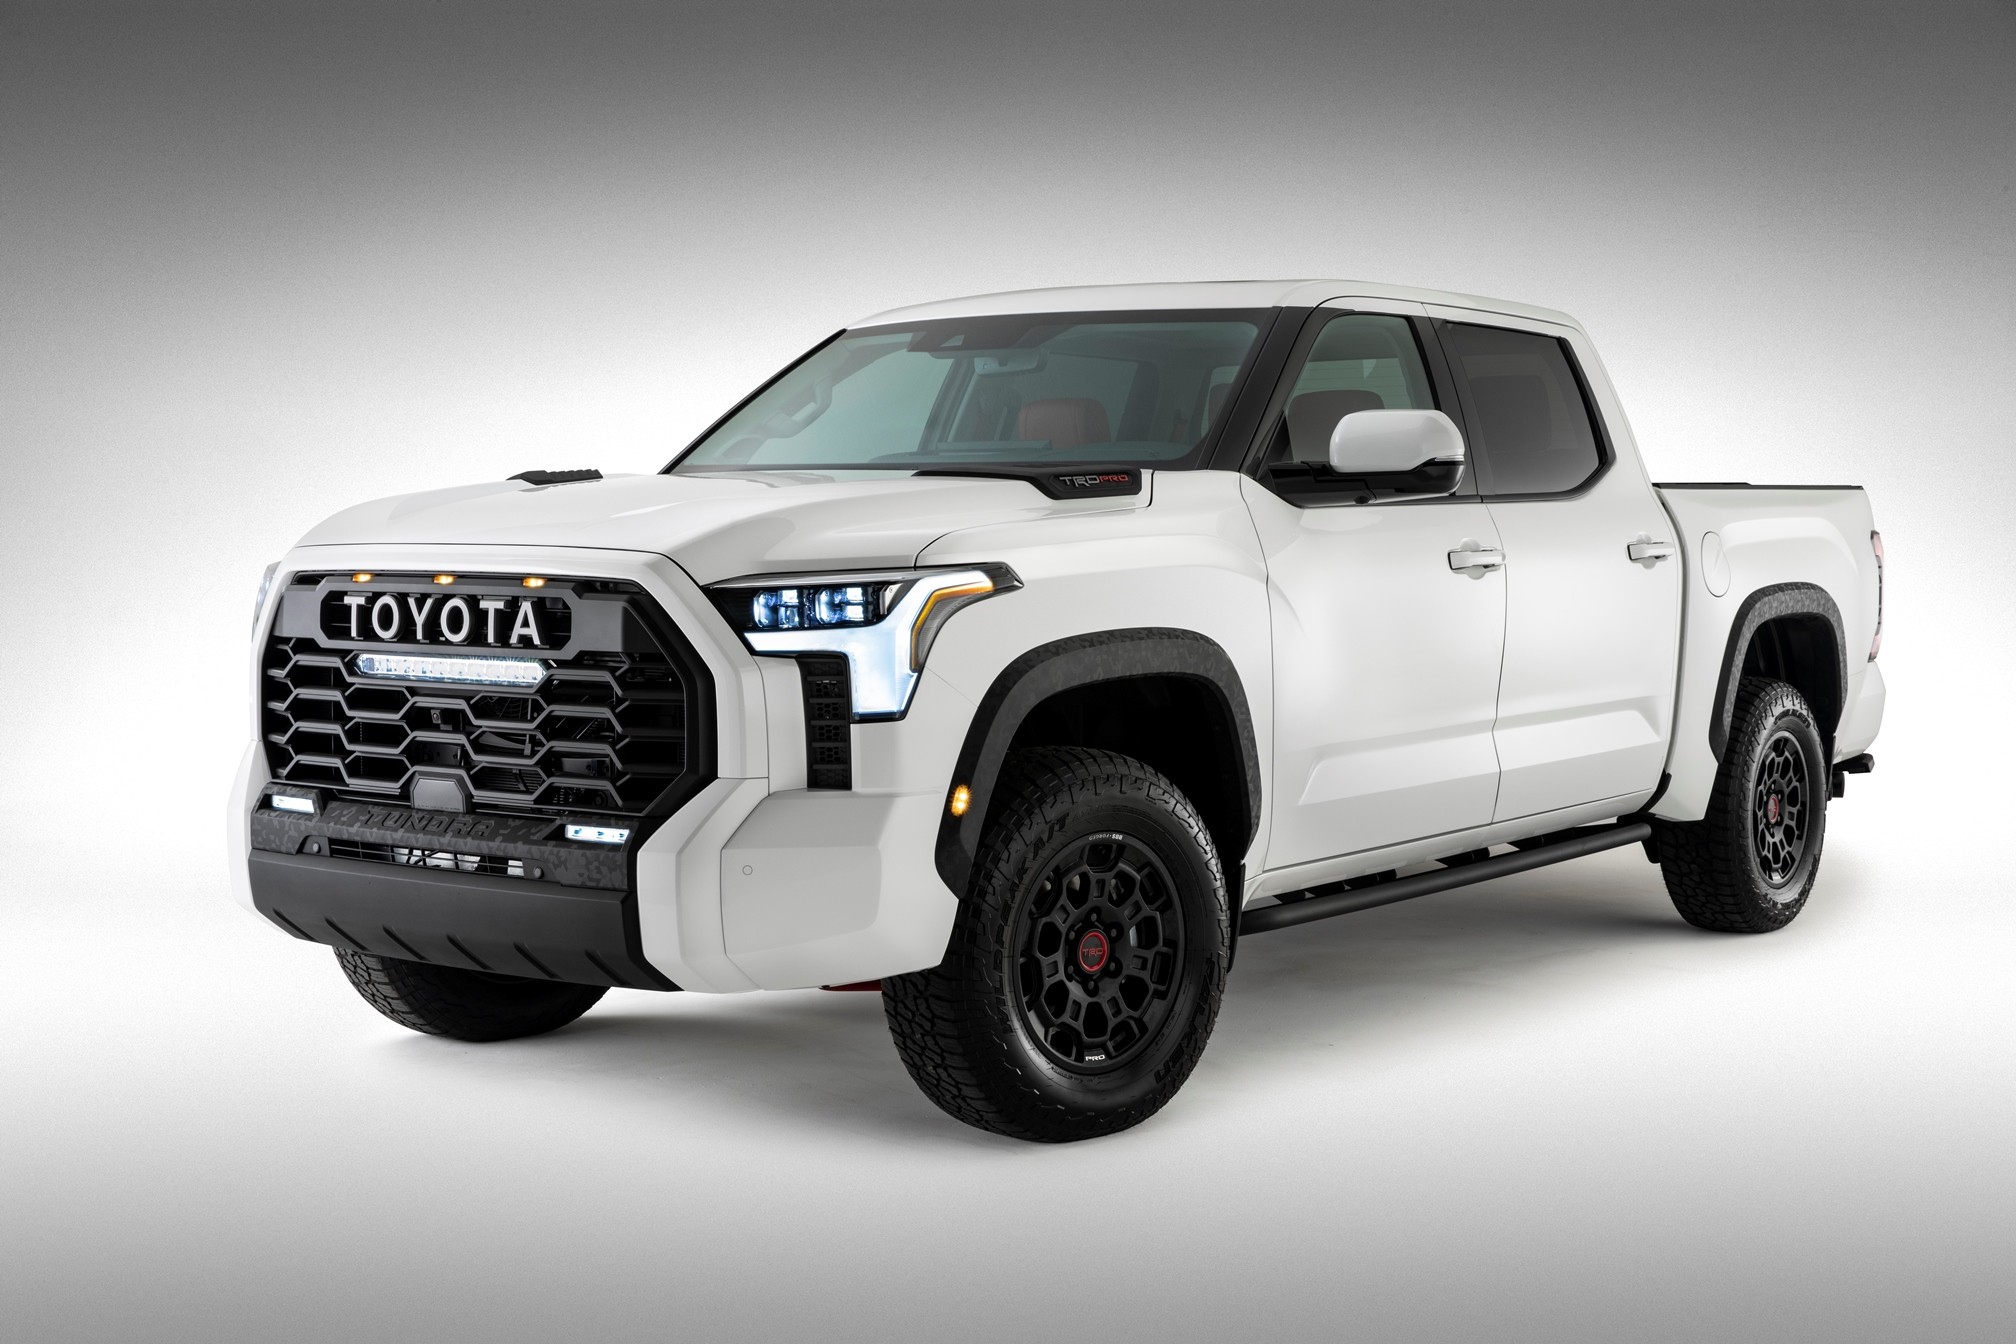 2022 Toyota Tundra First Official Photo Reveals 32.5-Inch Tires for the